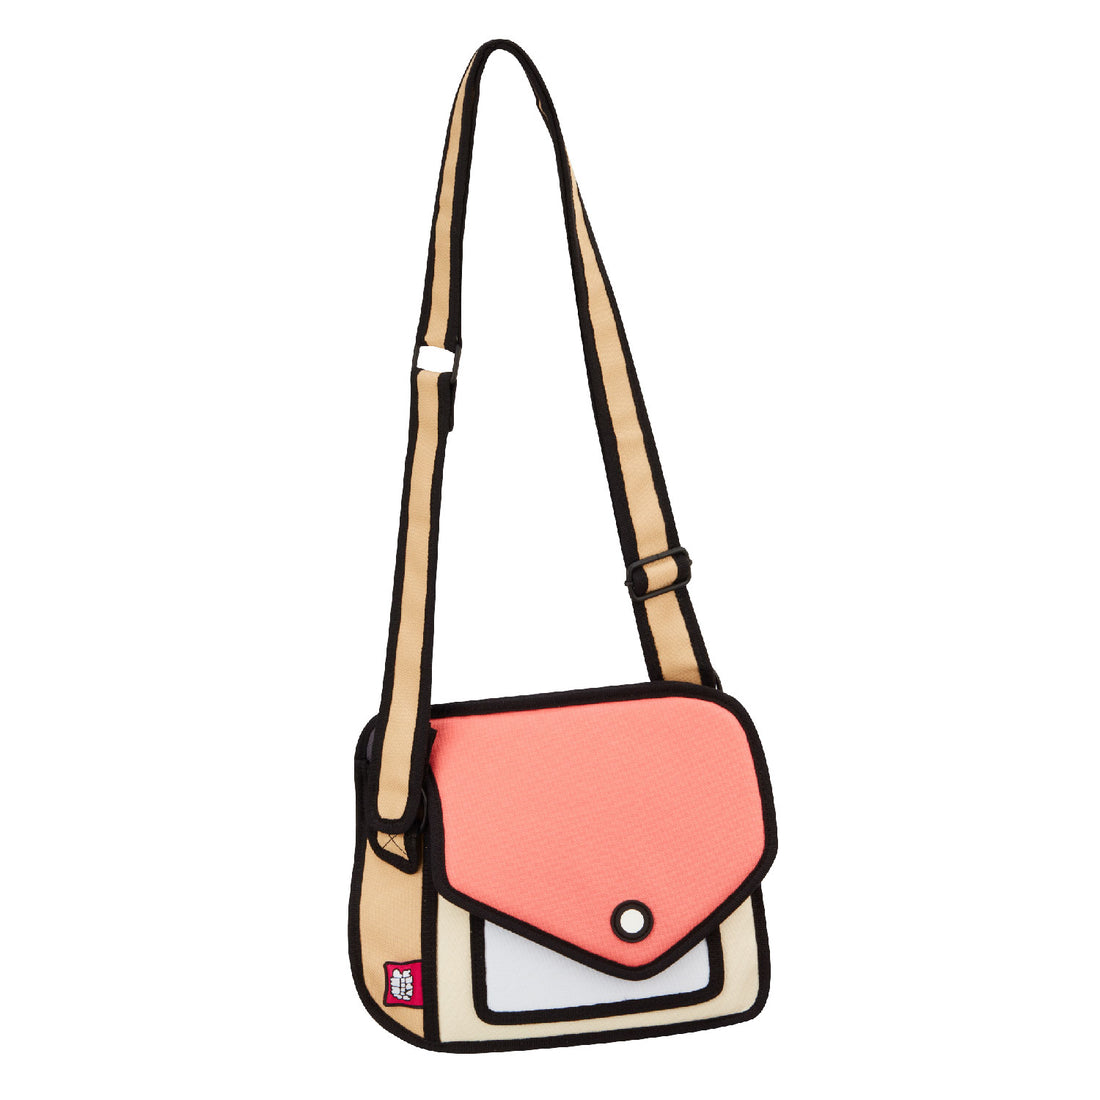 Giggle Watermelon Red Shoulder Bag - JumpFromPaper